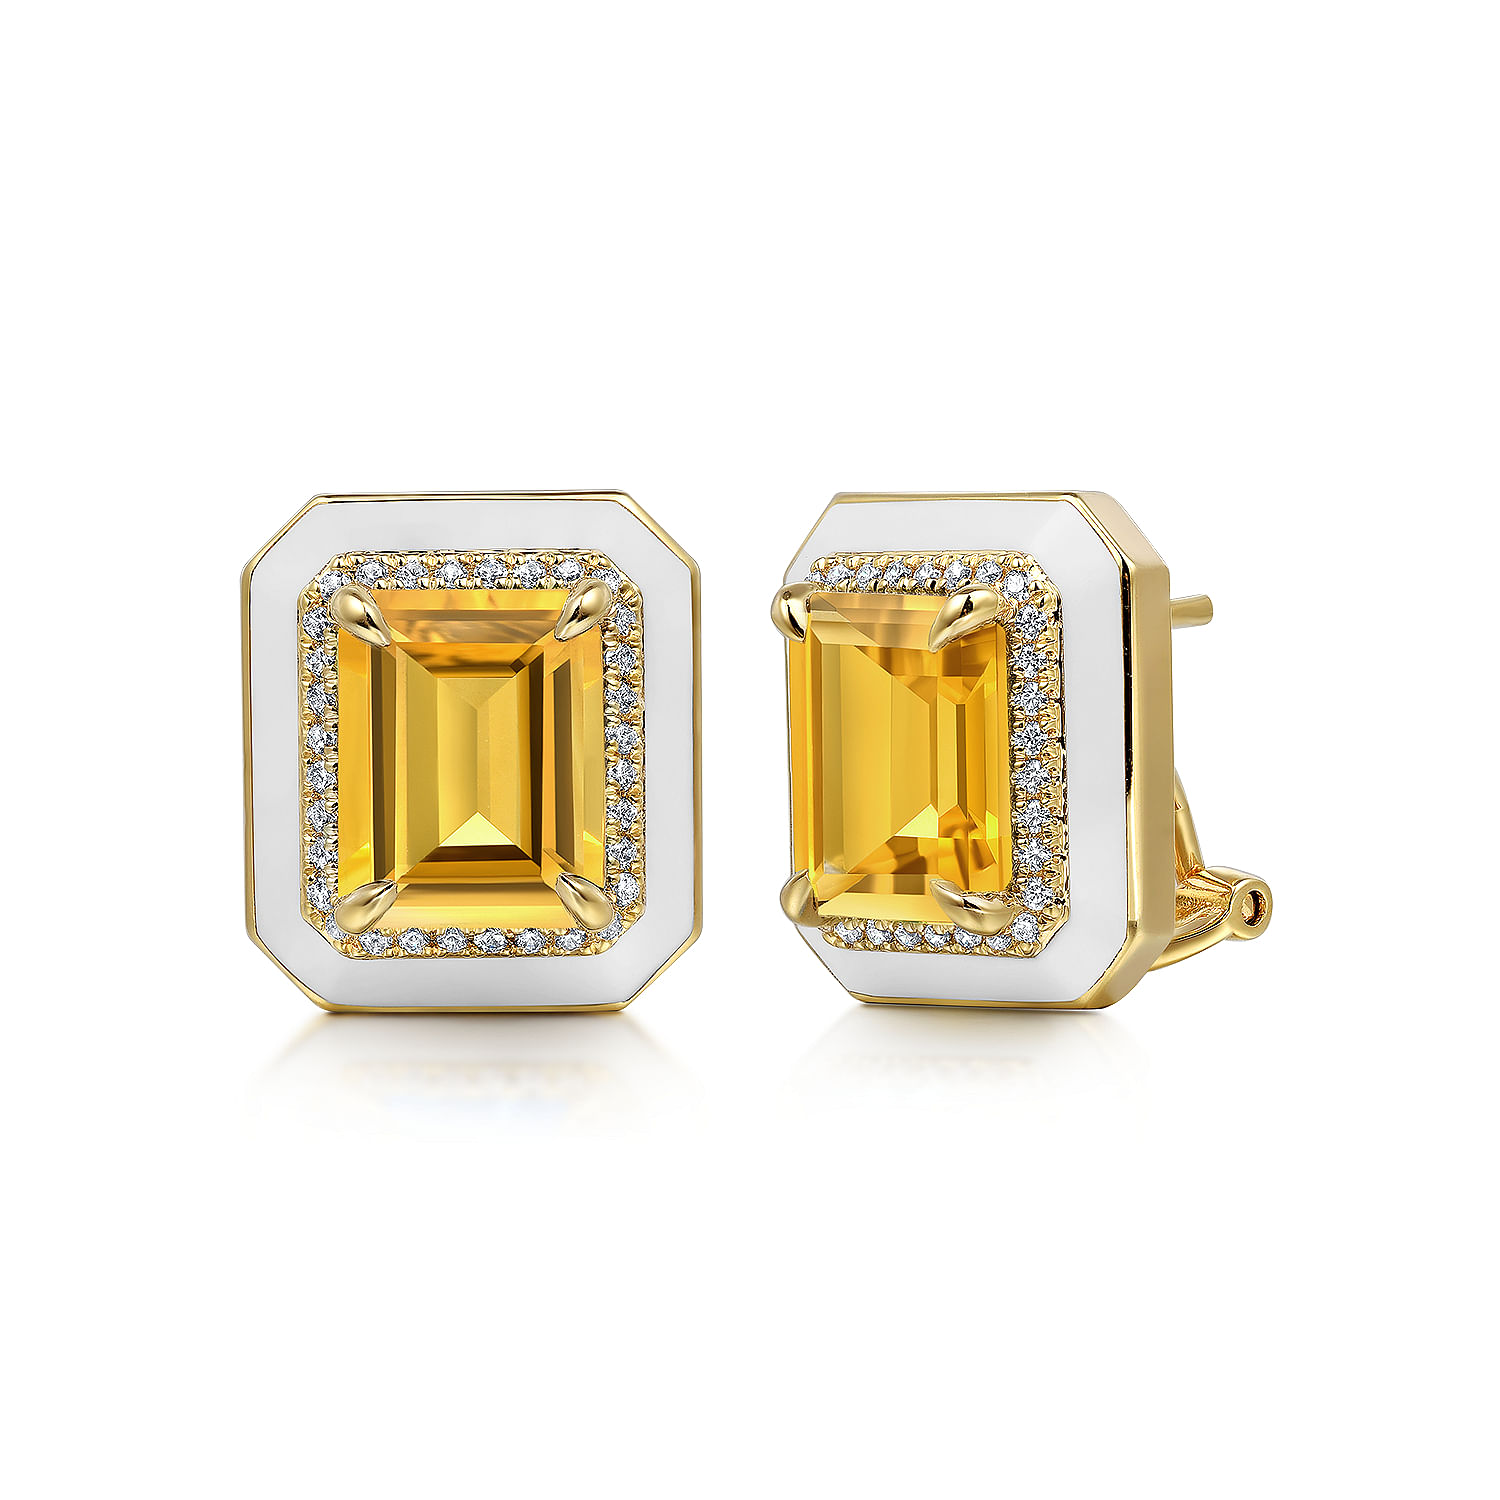 Gabriel - 14K Yellow Gold Diamond and Citrine Emerald Cut Earrings With Flower Pattern J-Back and White Enamel